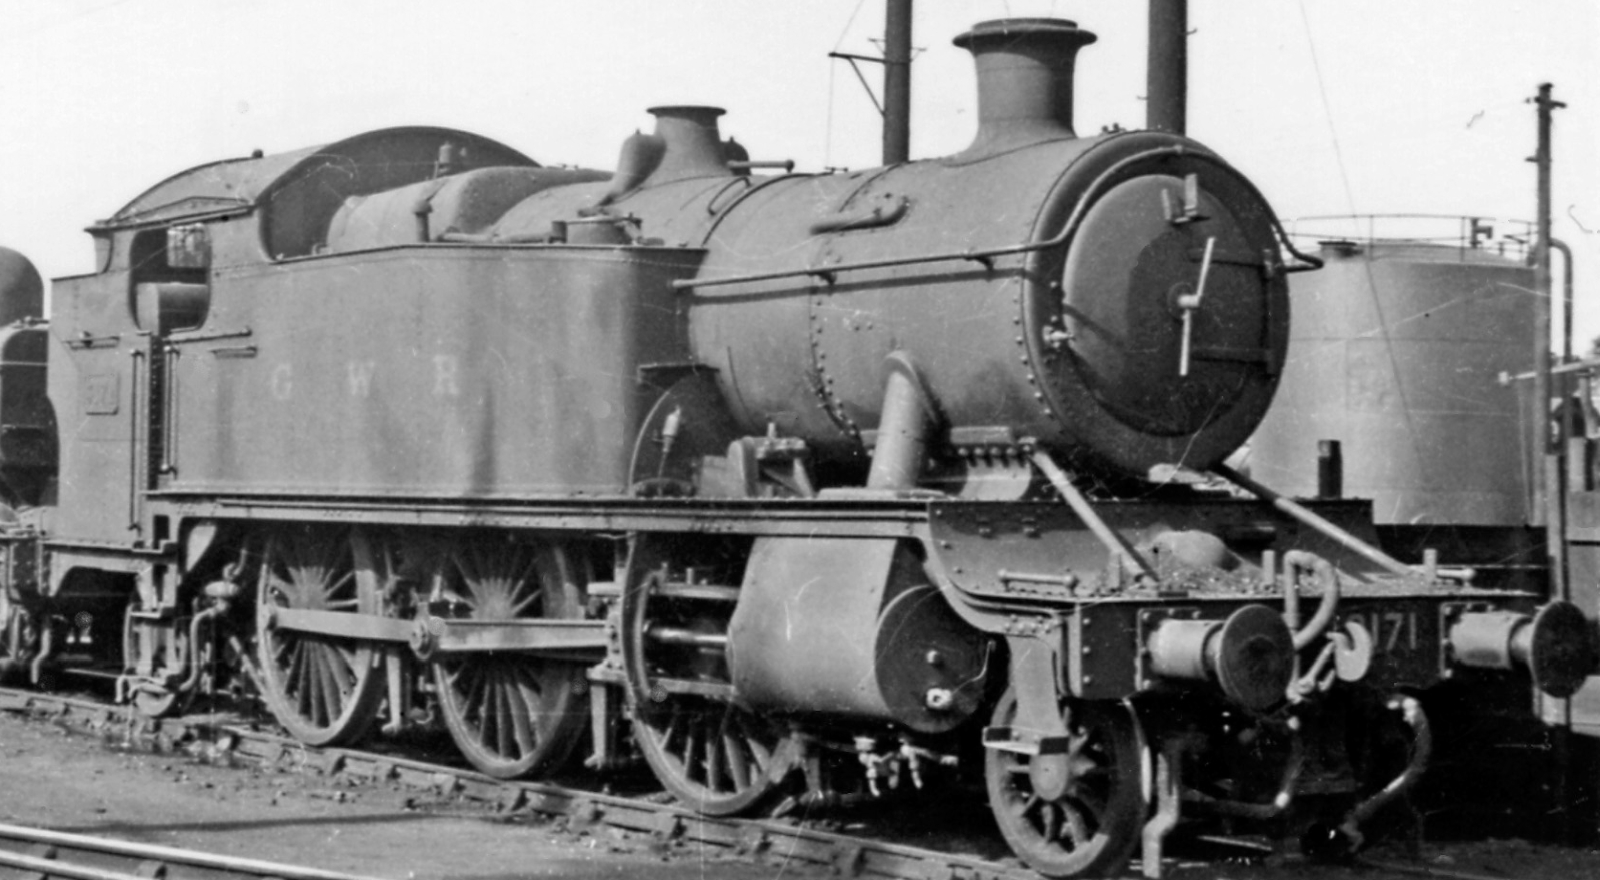 One example is parked in the Gloucester depot in 1948, when it was only used as a pusher locomotive